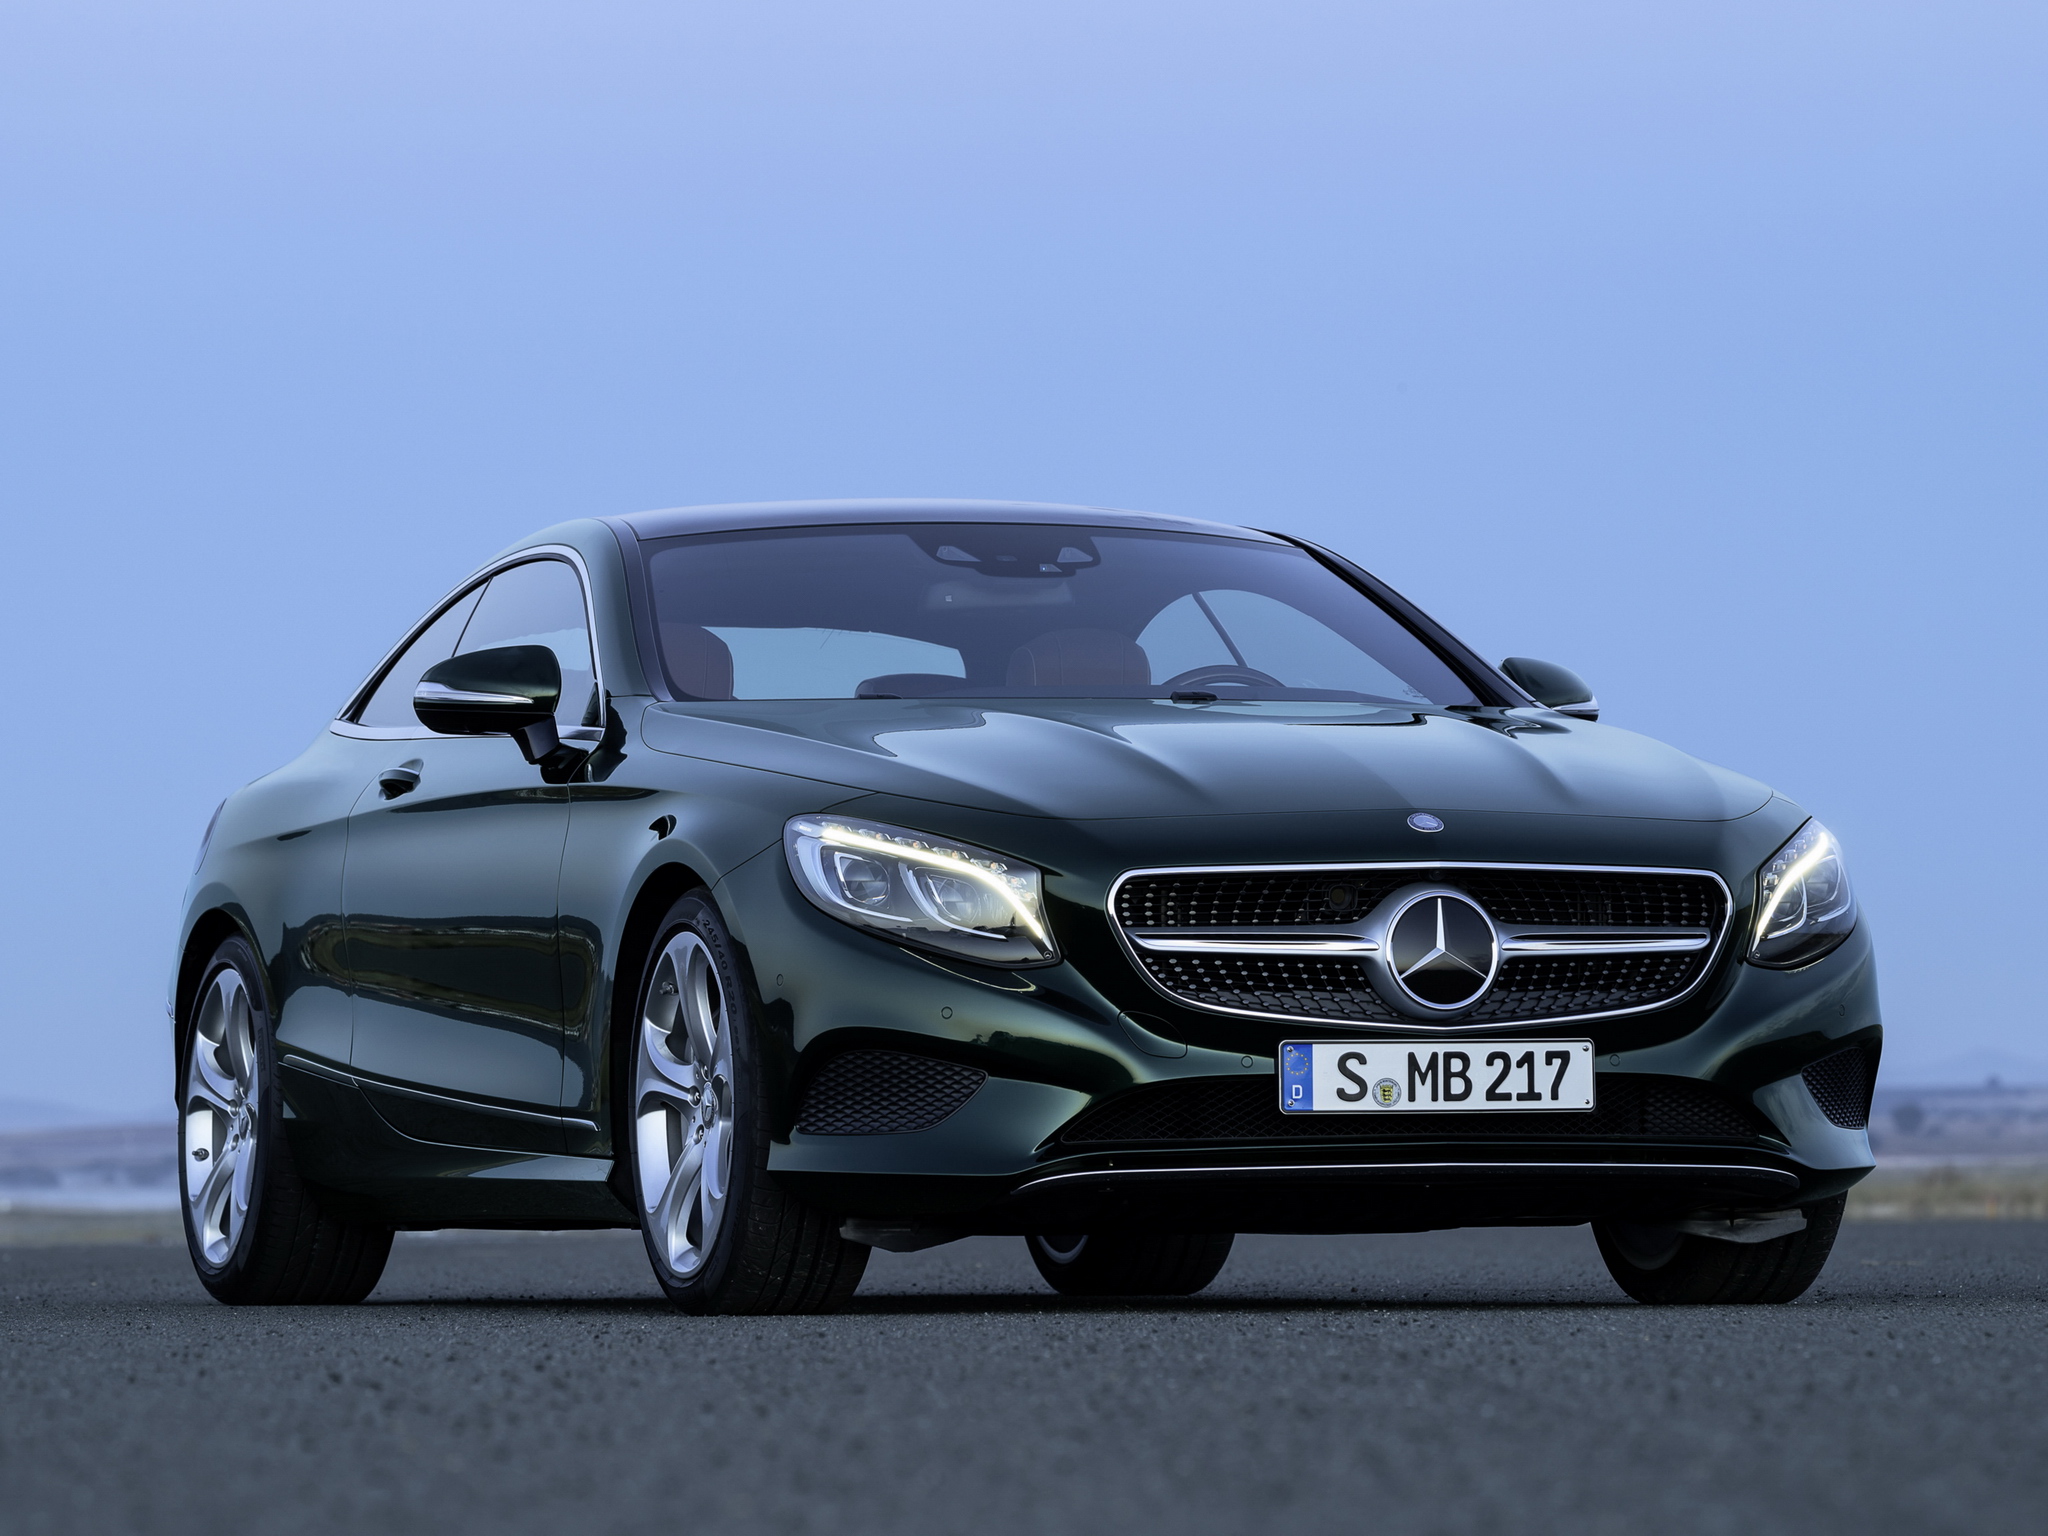 2019 Mercedes-Benz S-Class Coupe And S-Class Cabriolet To ...